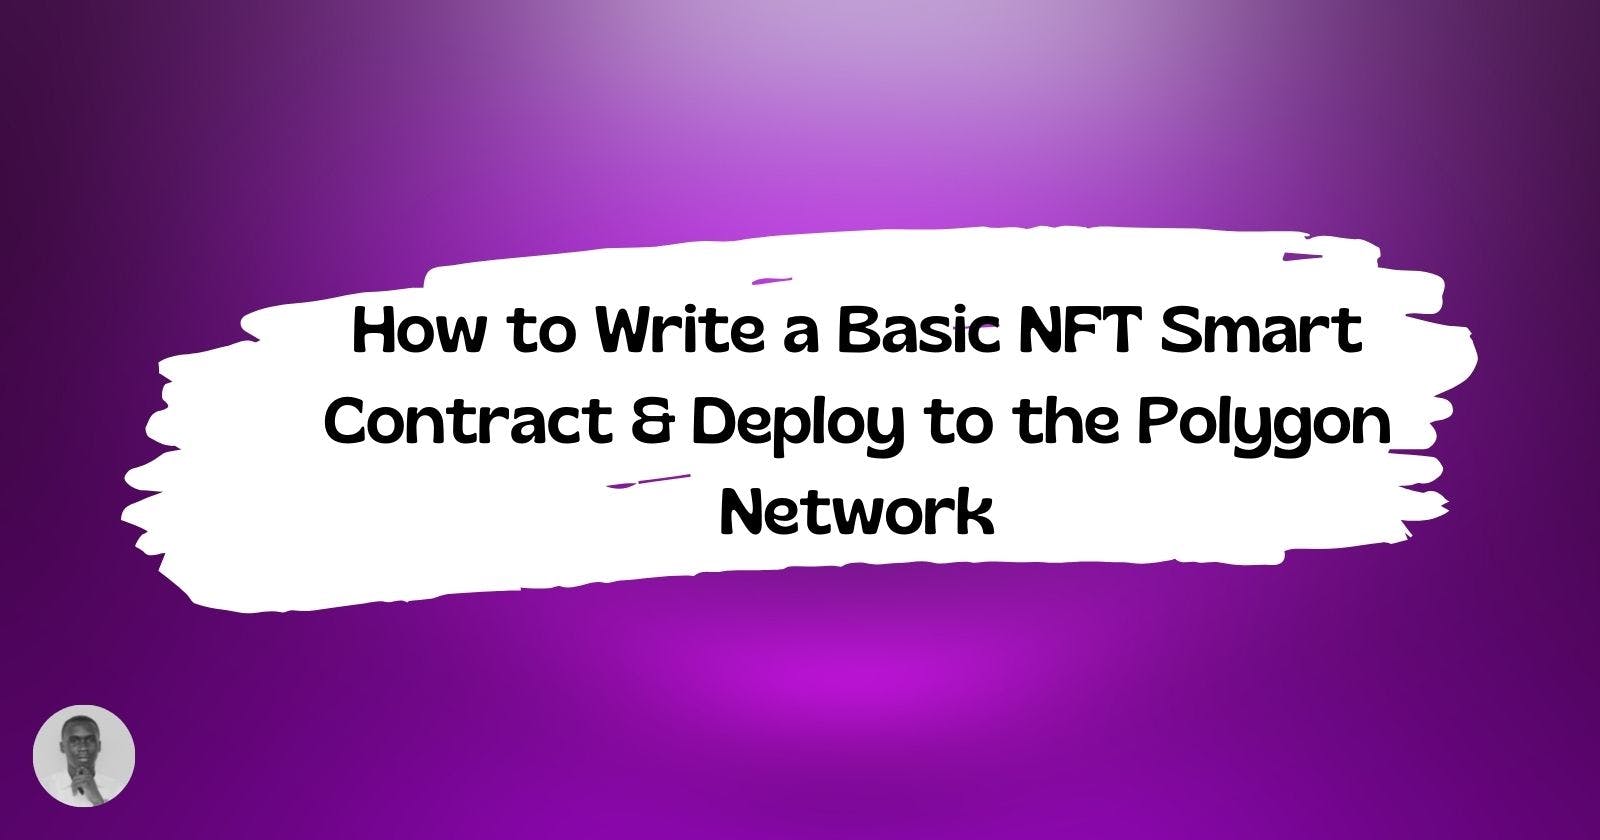 How to Write a Basic NFT Smart Contract & Deploy to the Polygon Network